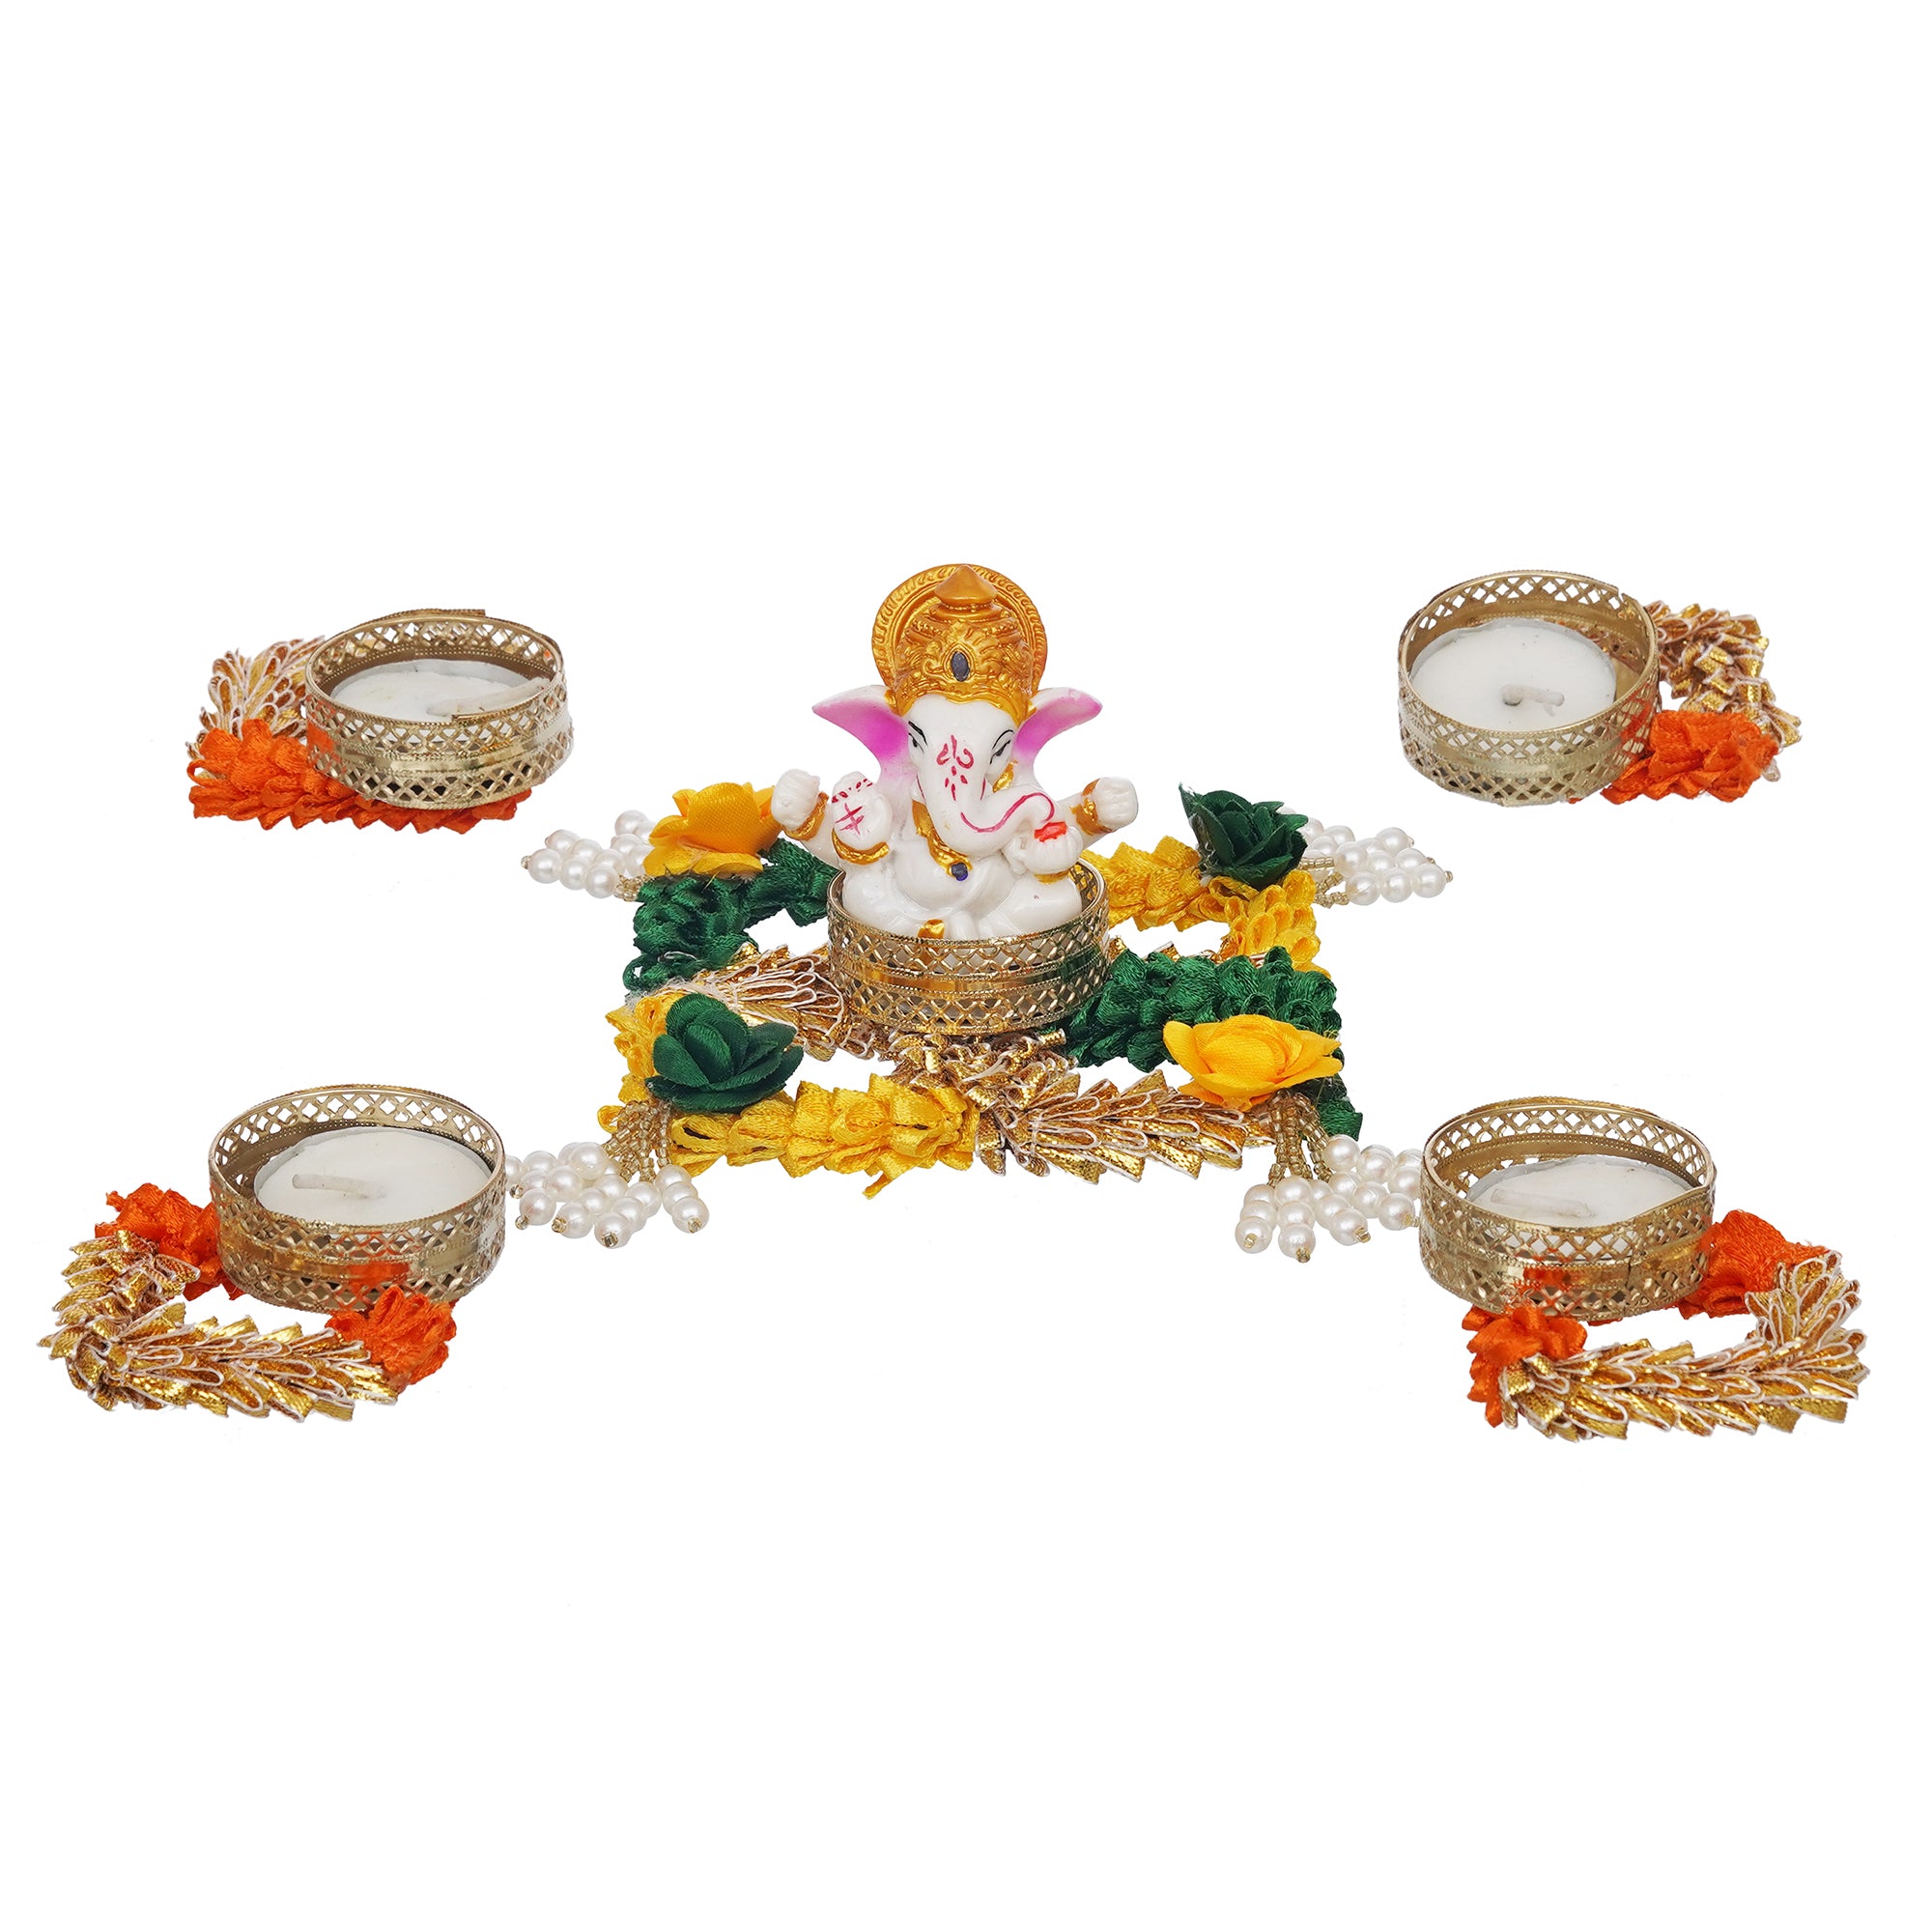 eCraftIndia Lord Ganesha Idol on Floral and Beads Embellished Handcrafted Plate with 4 Decorative Tea Light Candle Holders 2